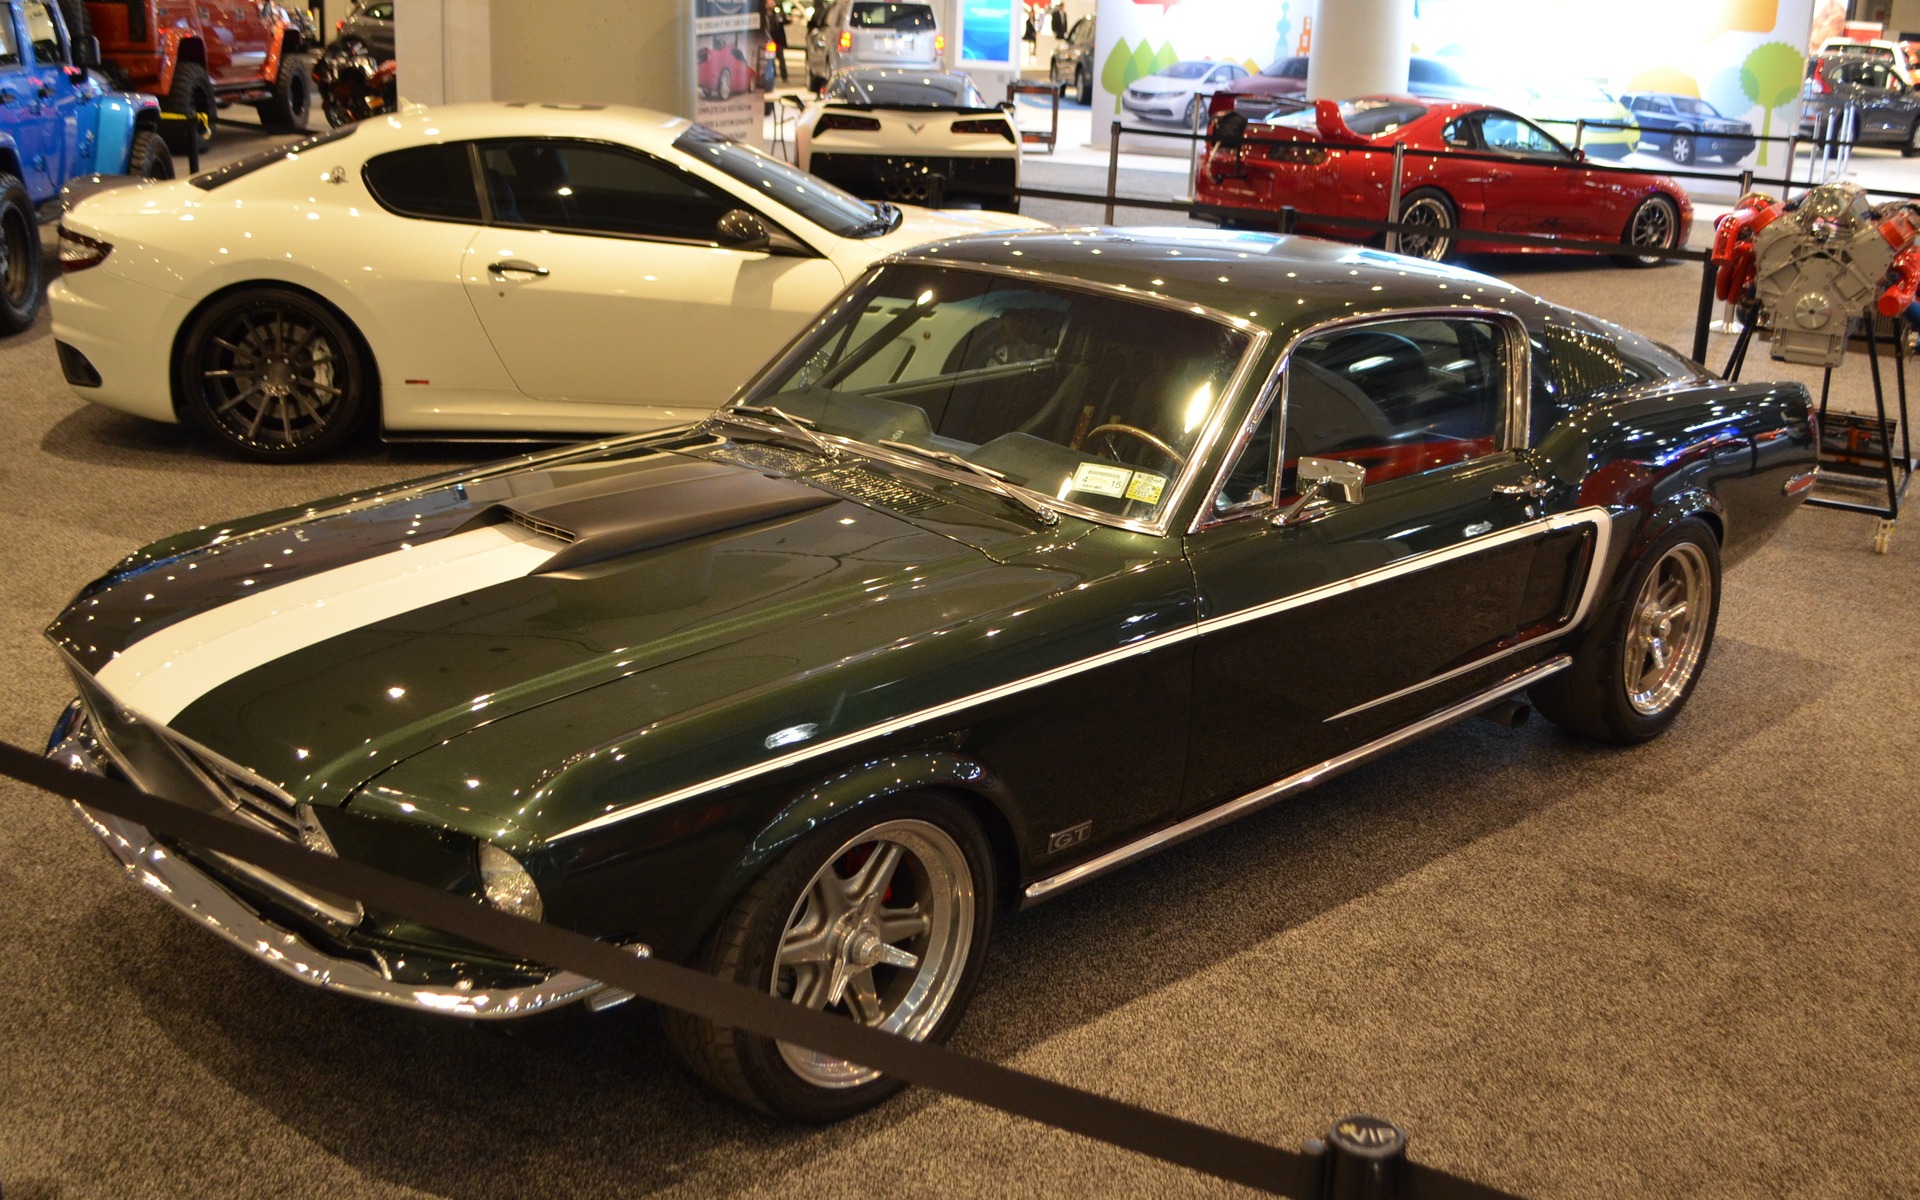 1968 Ford Mustang GT. Just beautiful.